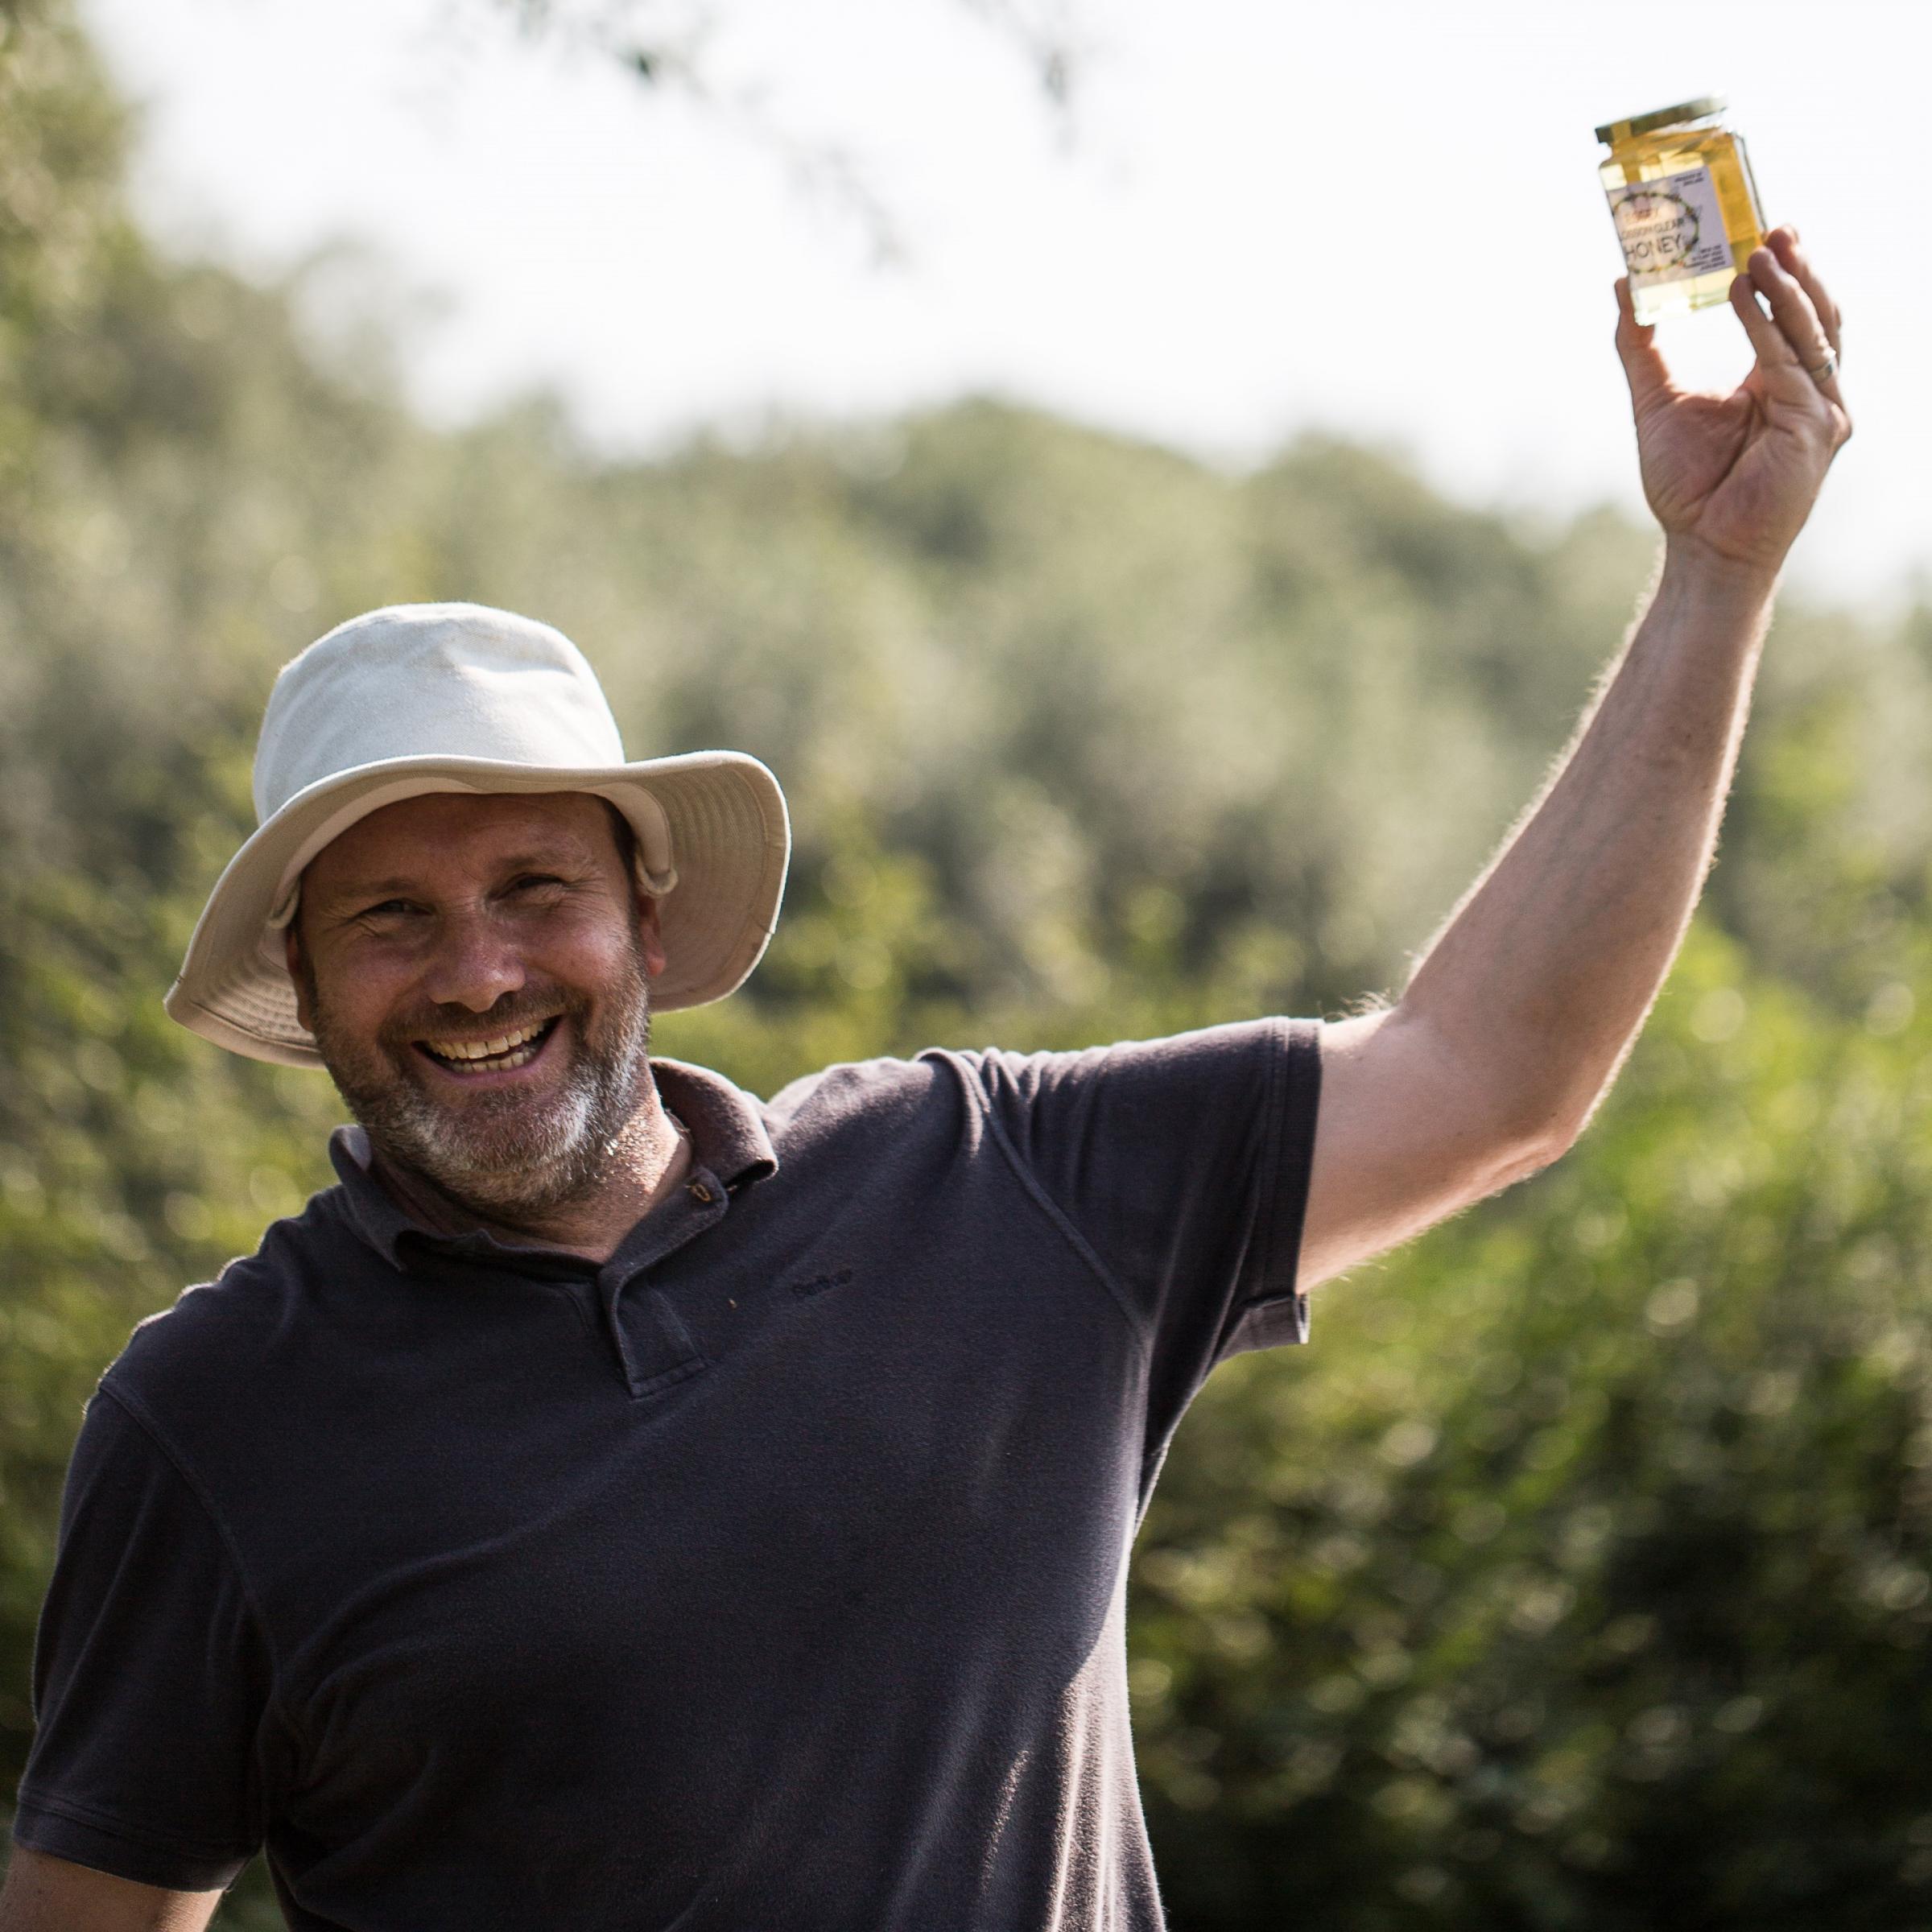 Honey producer is crowned County Champion by the East of England Co-op